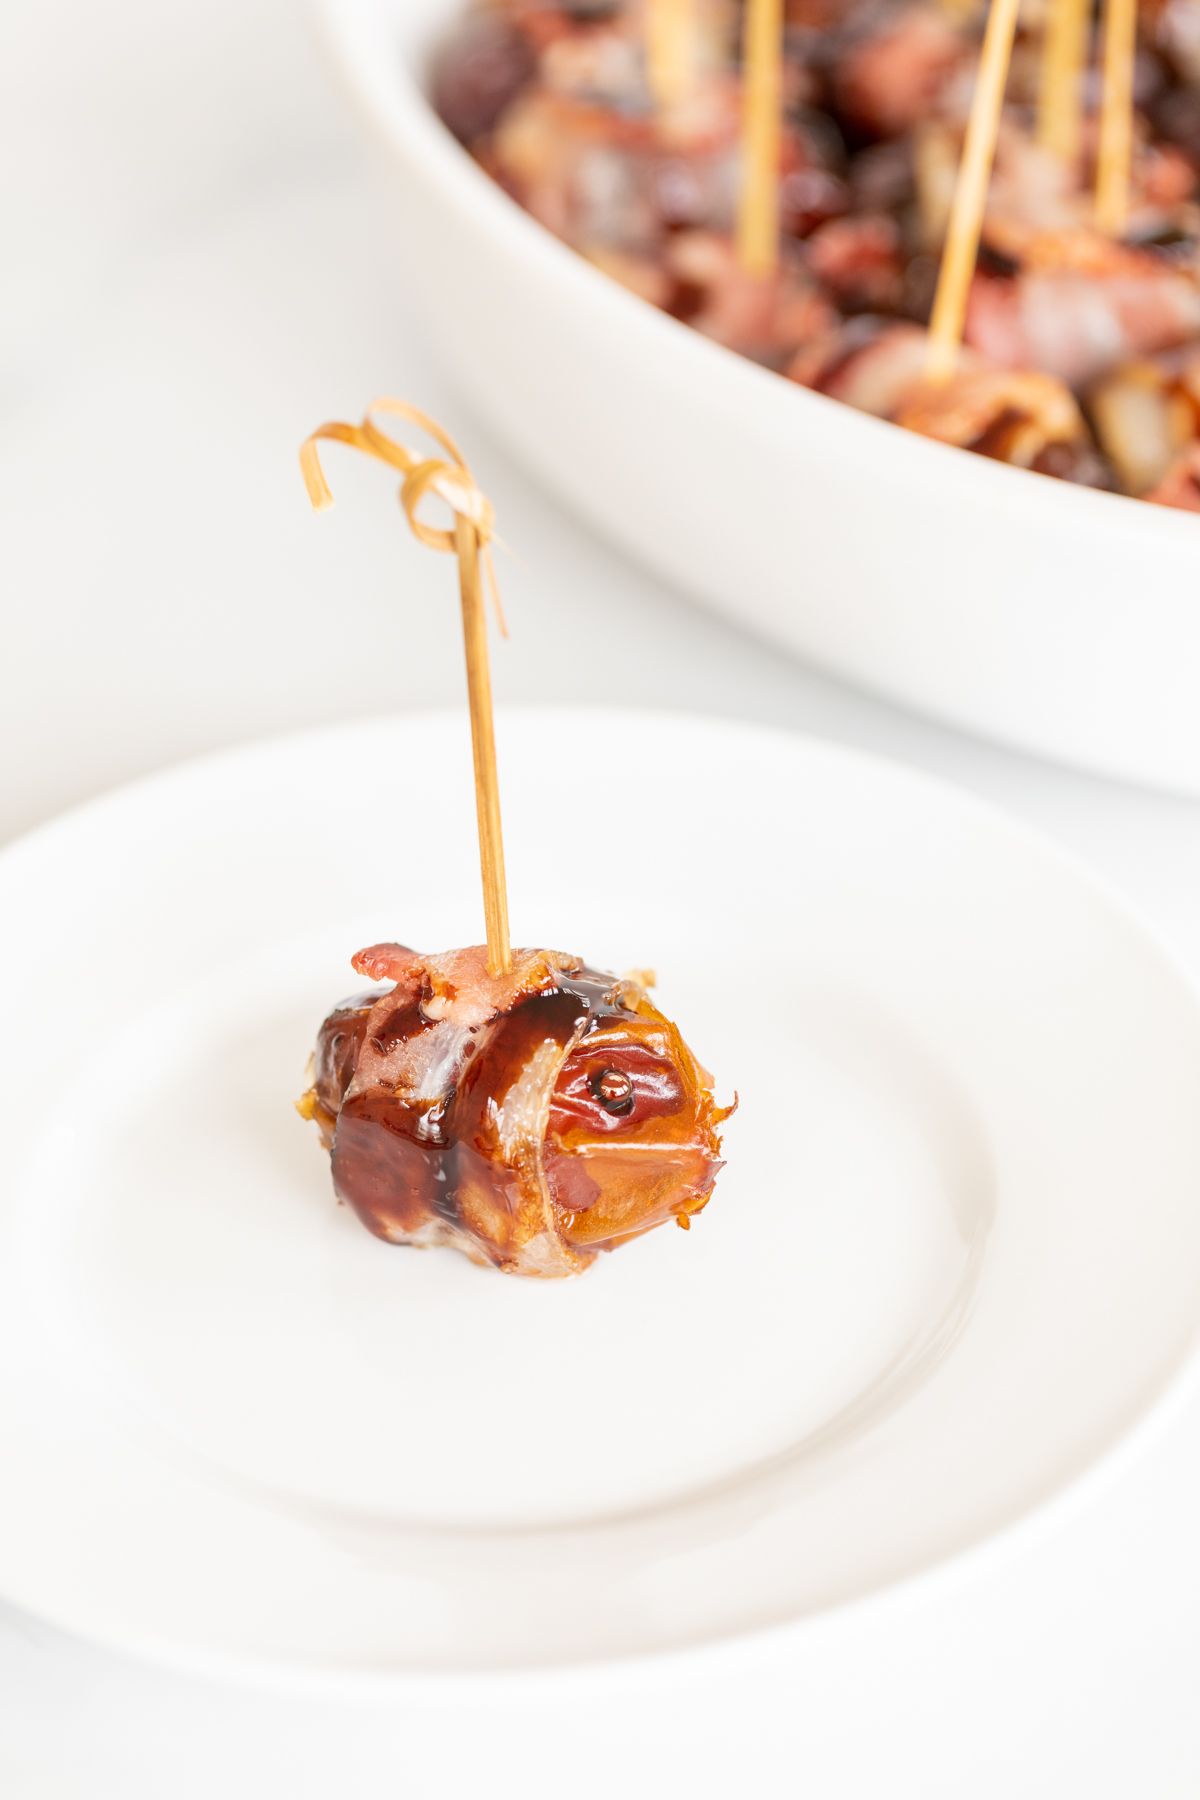 A single stuffed date wrapped in bacon on a white plate, with a dish full of them in the background.